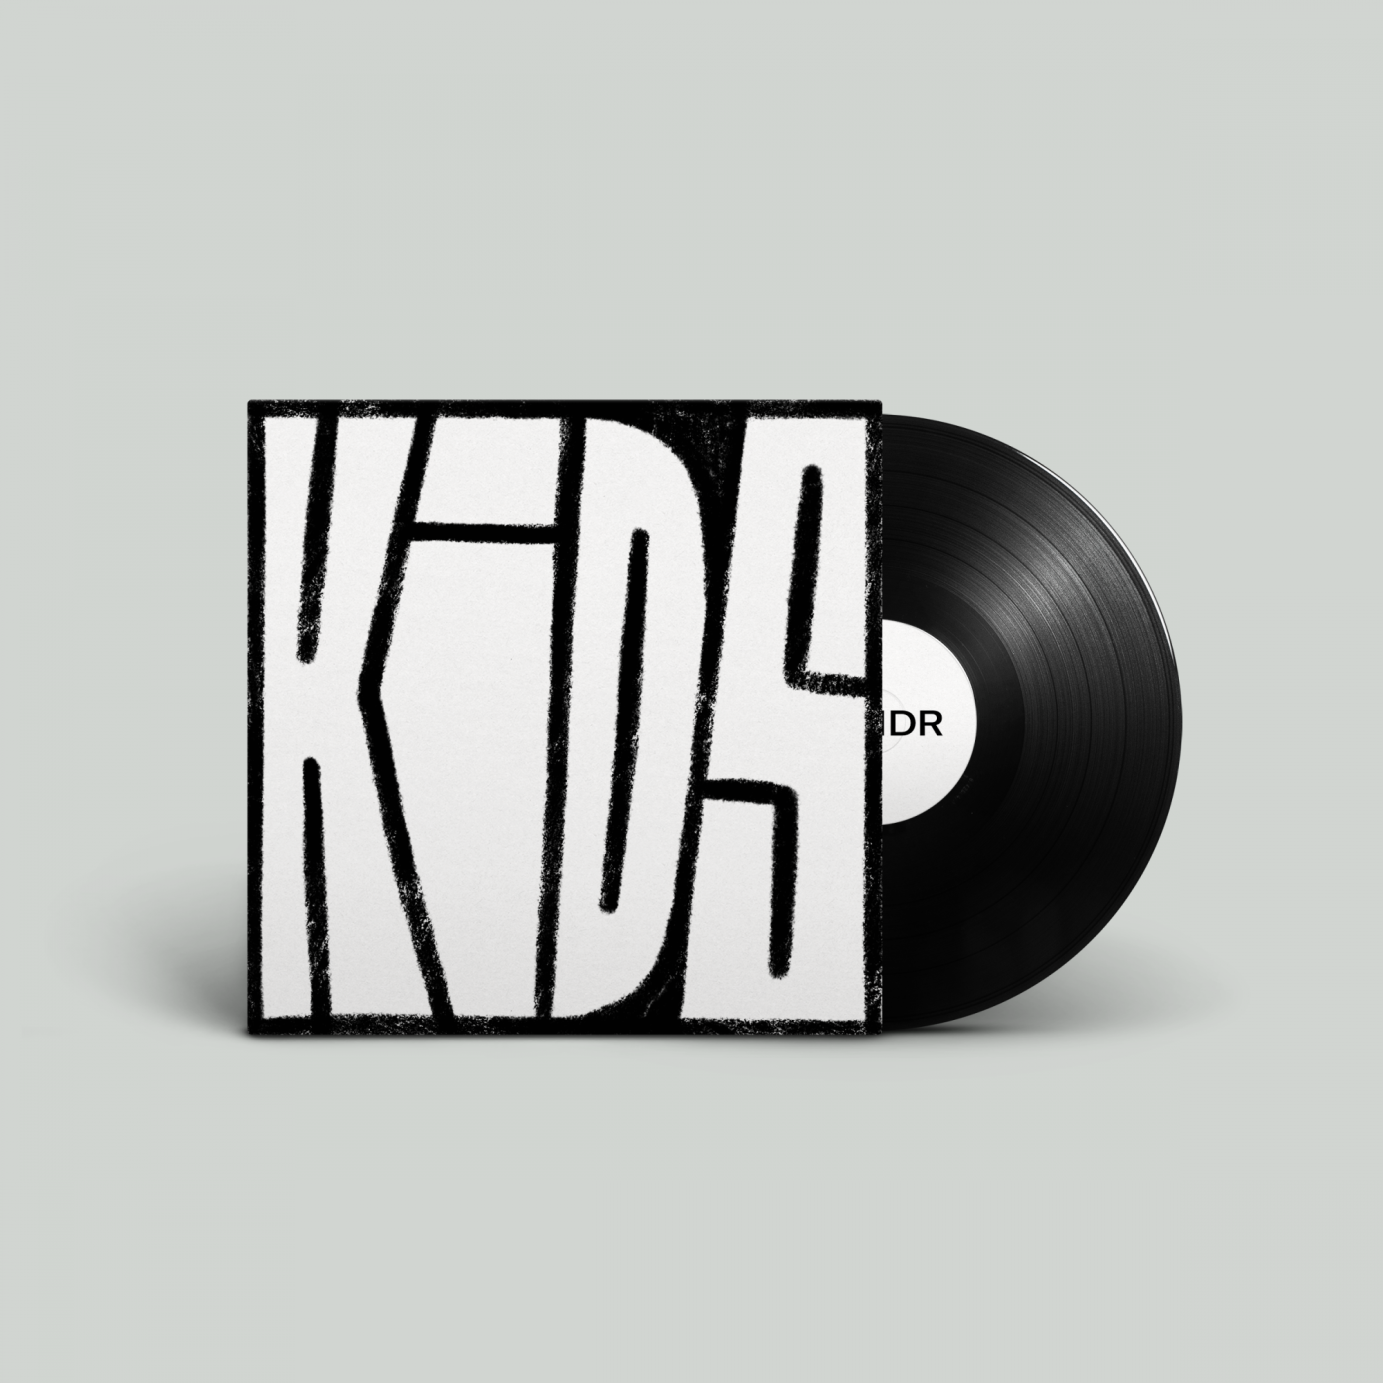 SONDR with VIZE feat Lilly Ahlberg - KIDS